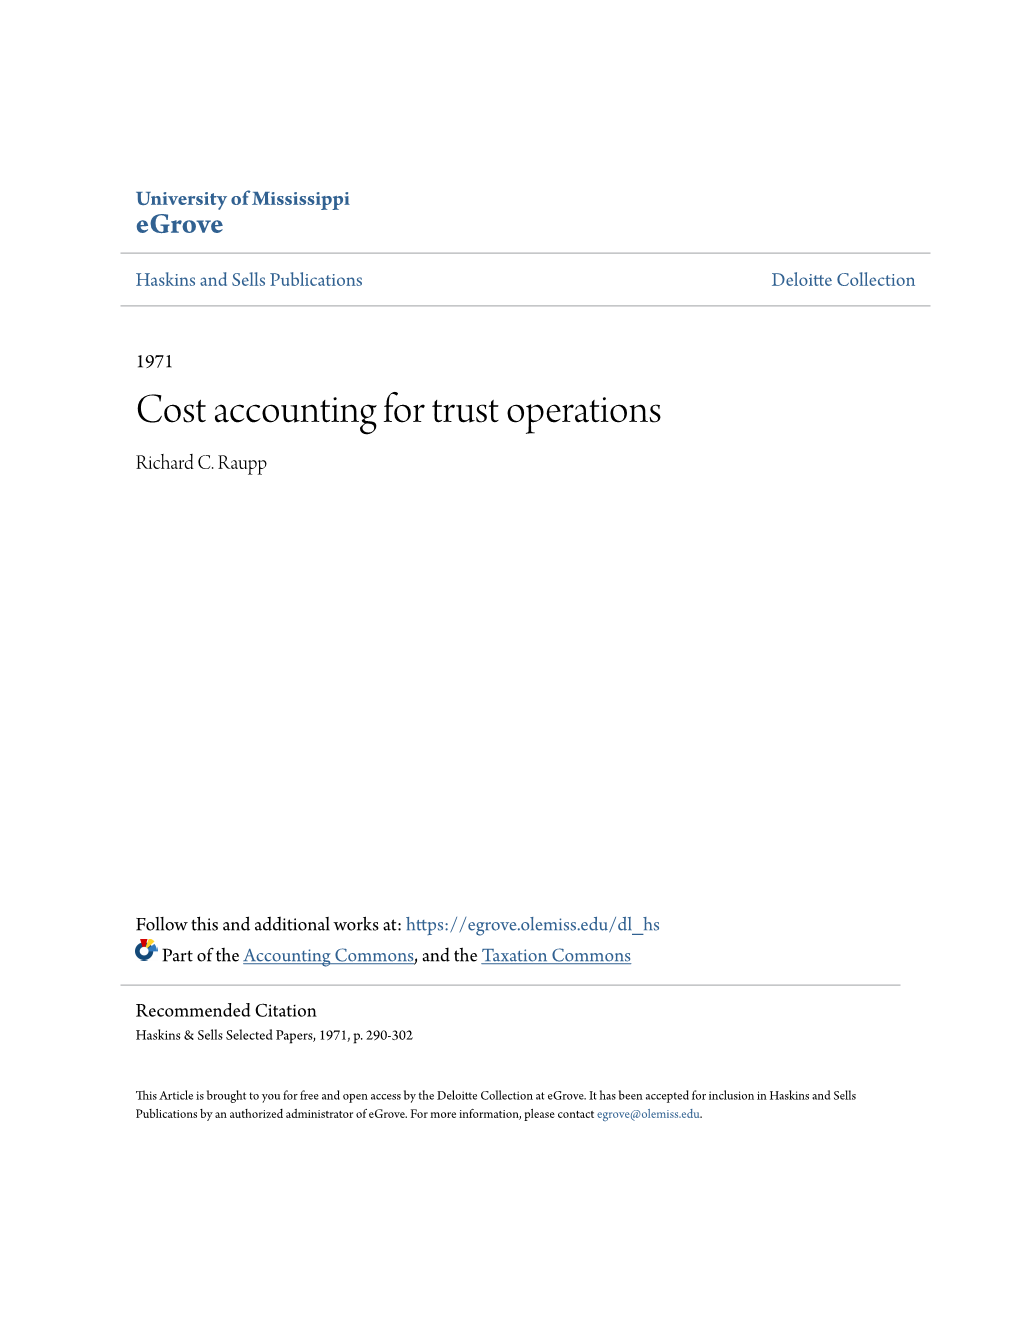 Cost Accounting for Trust Operations Richard C